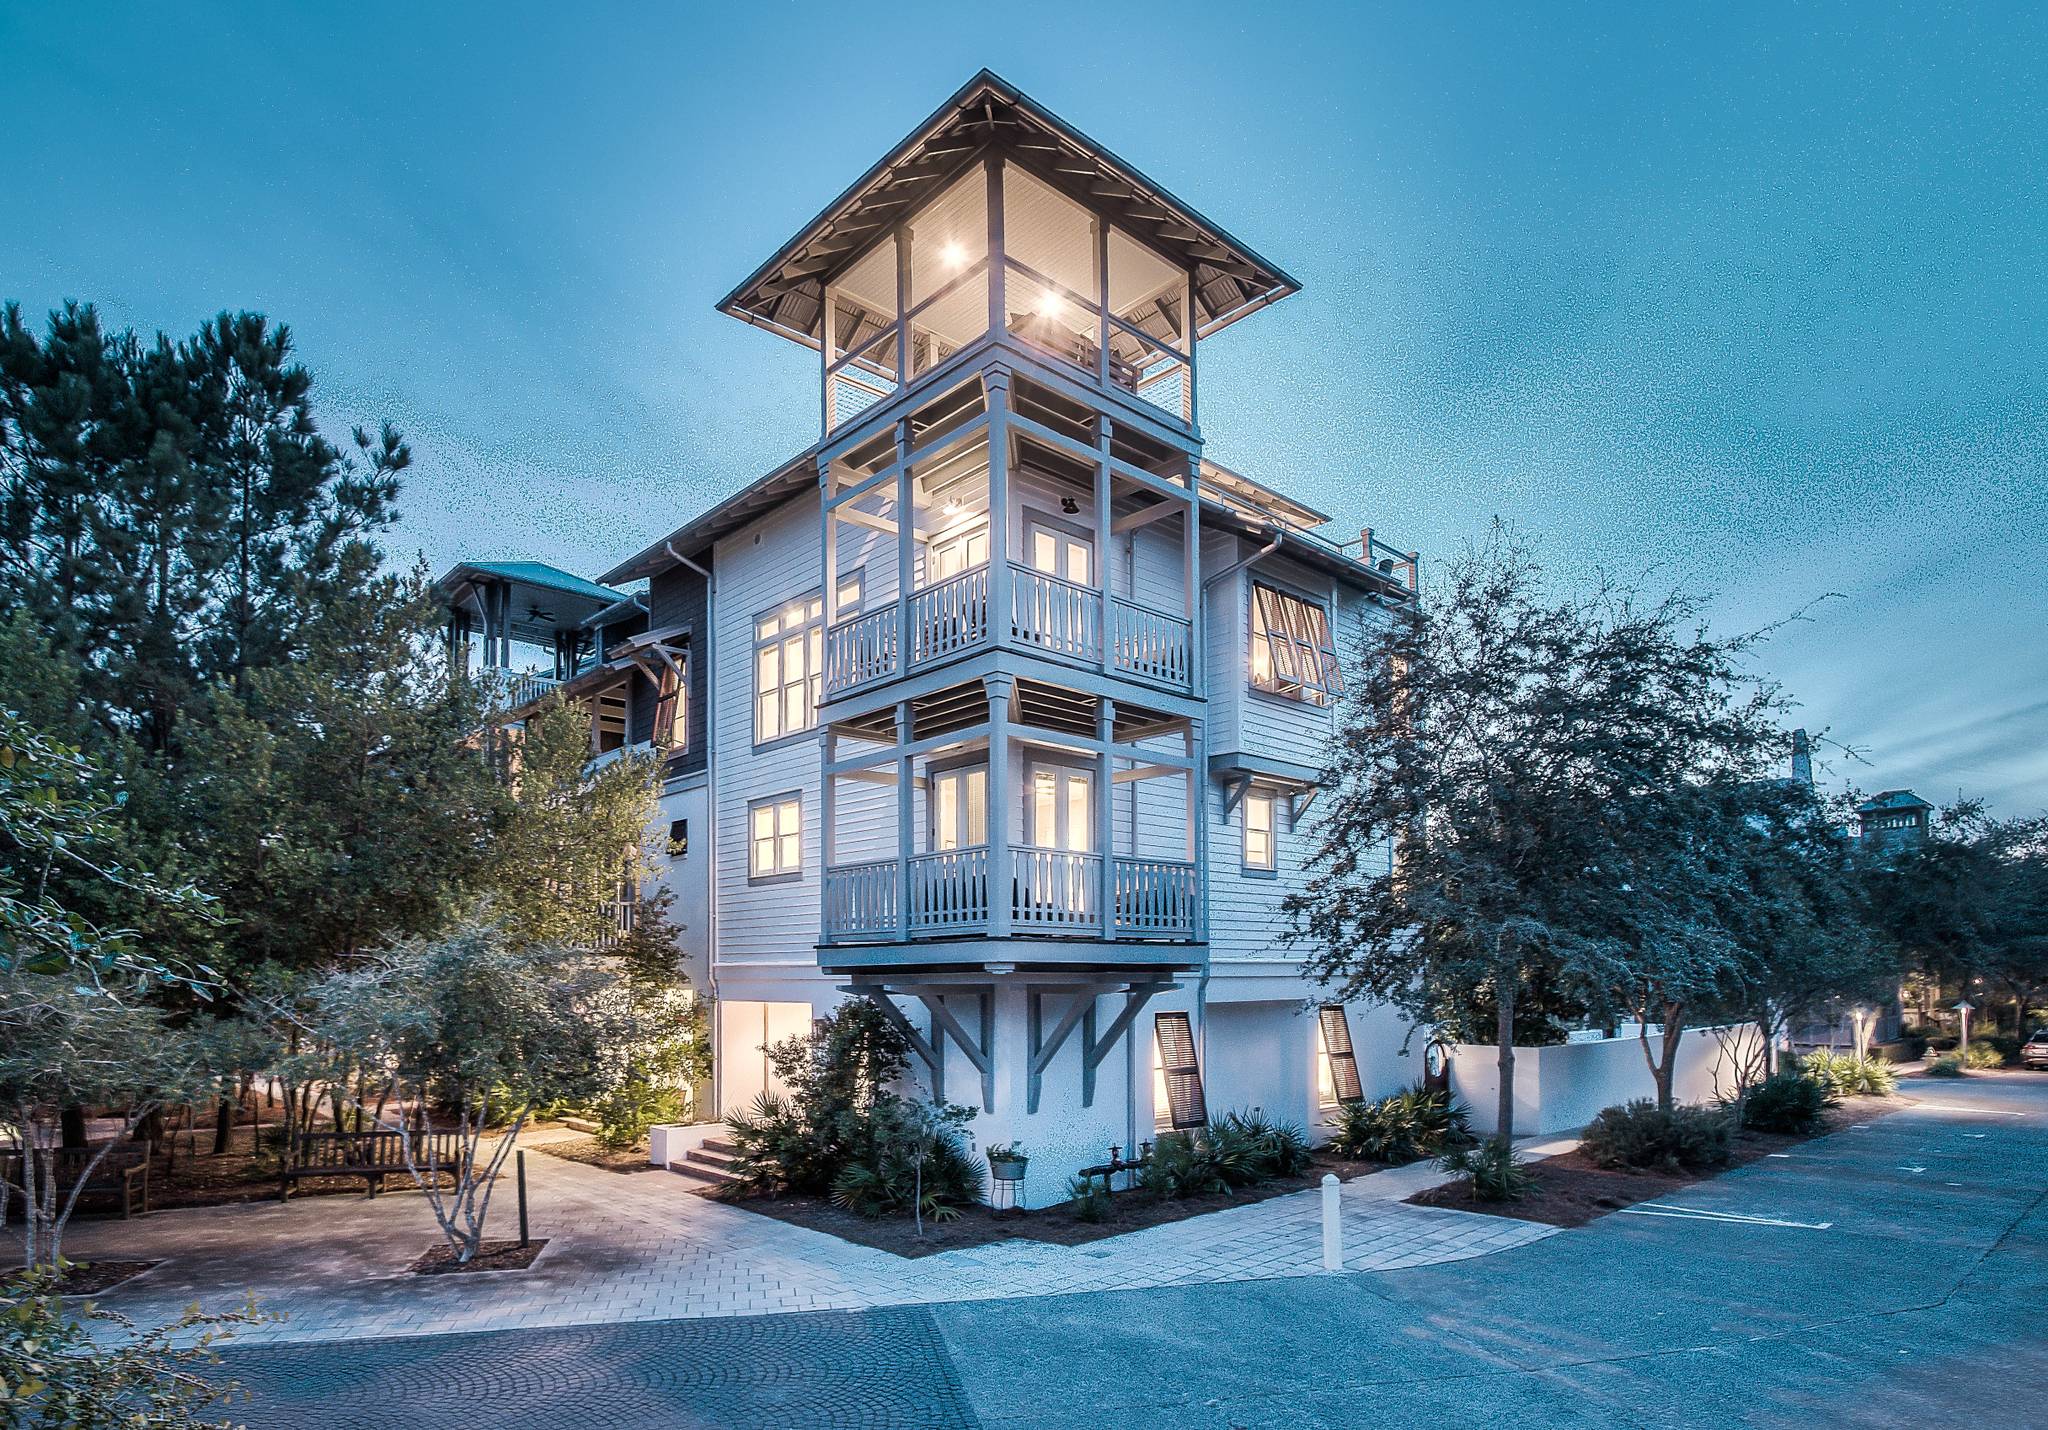 Thyme Place - Rosemary Beach Vacation Rental